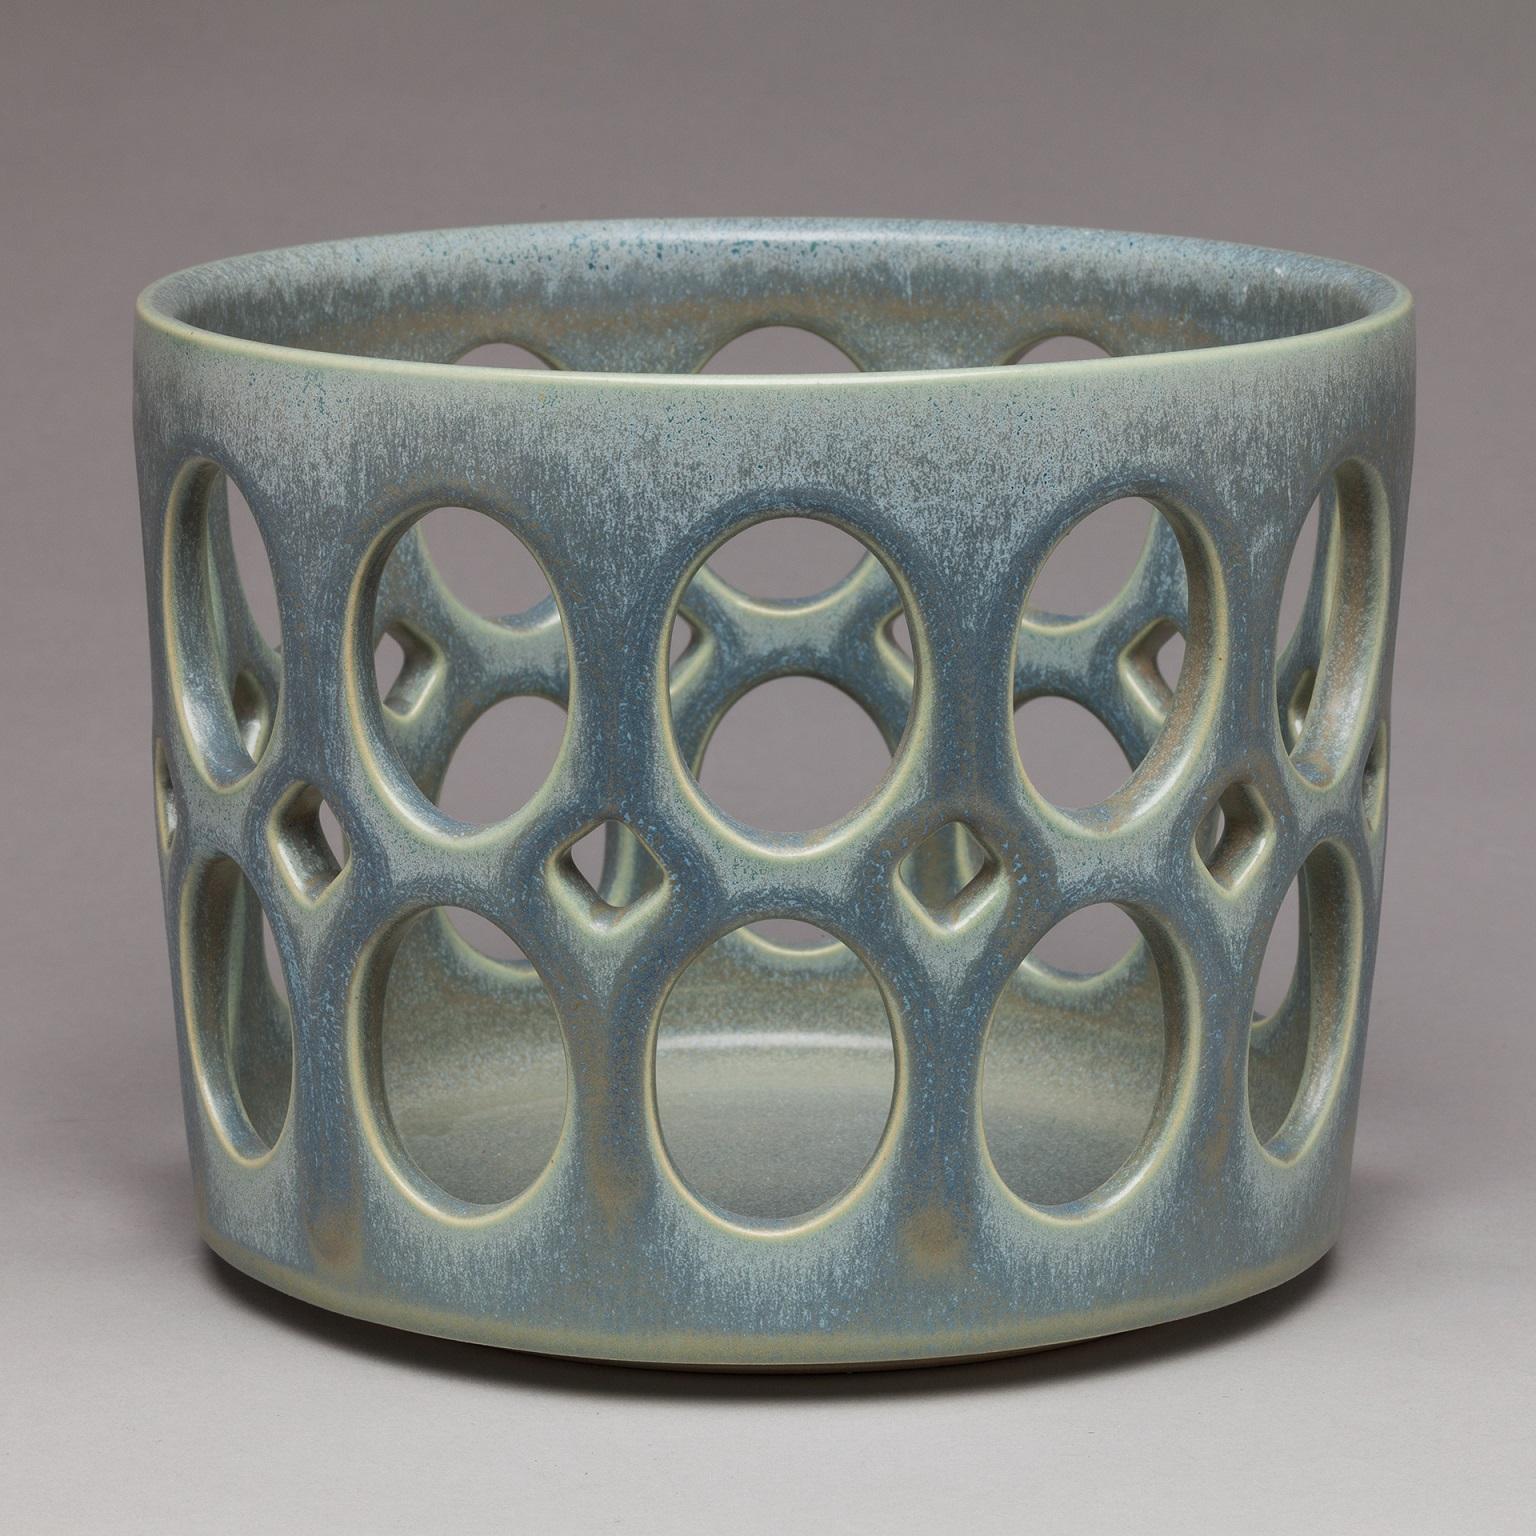 Inspired by Mid-Century Modern design, this bowl is wheel thrown and hand pierced stoneware with satin glaze that breaks from blue to green to grey. Small holes are created when the clay is still wet and then each hole is painstakingly enlarged and